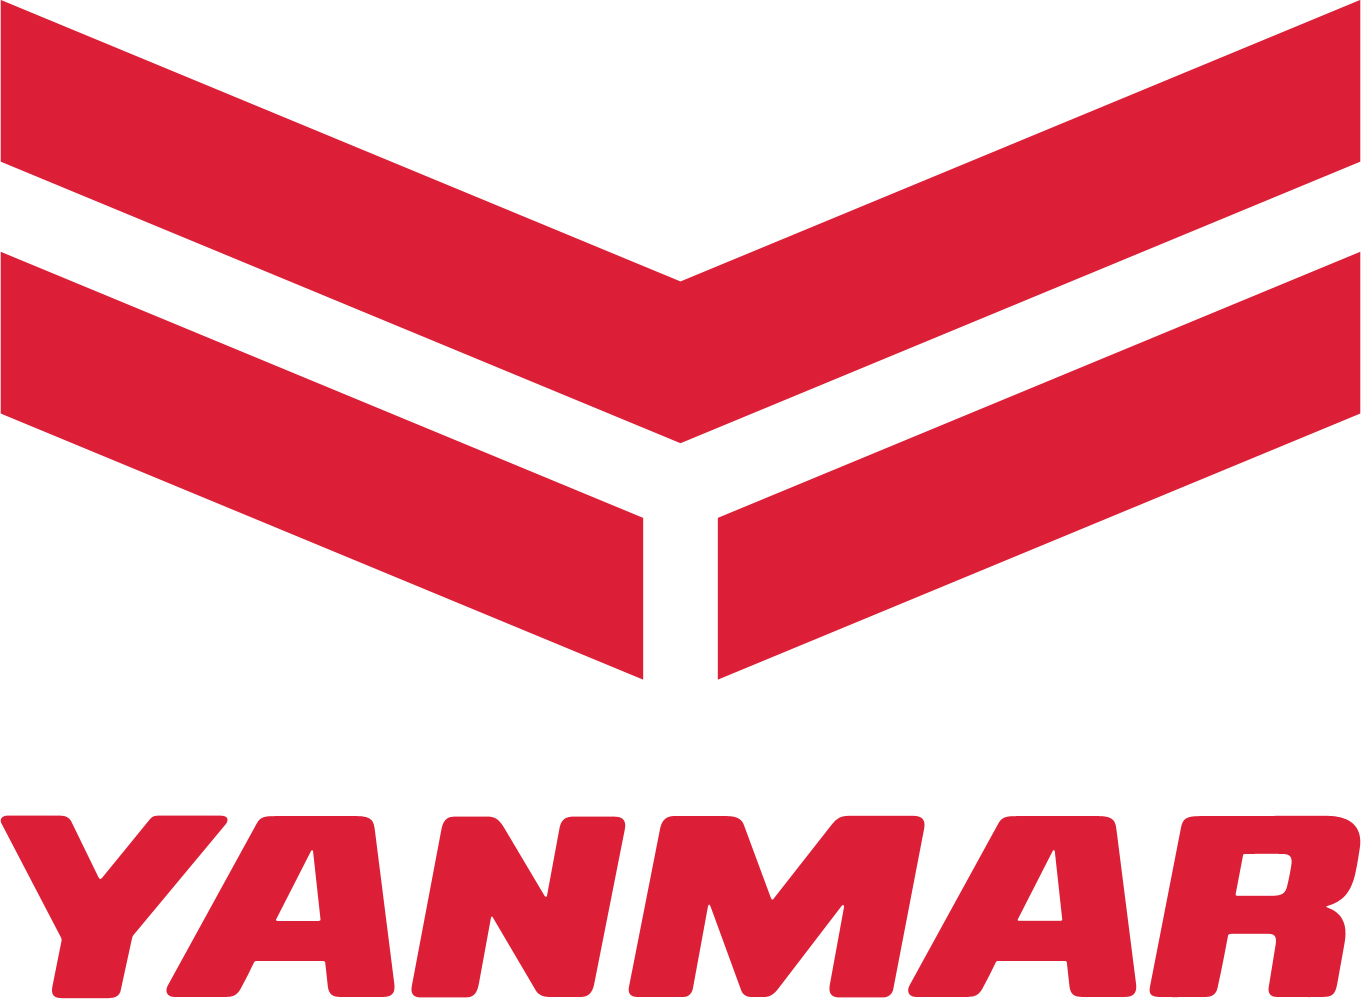 Improved and accelerated business processes at Yanmar